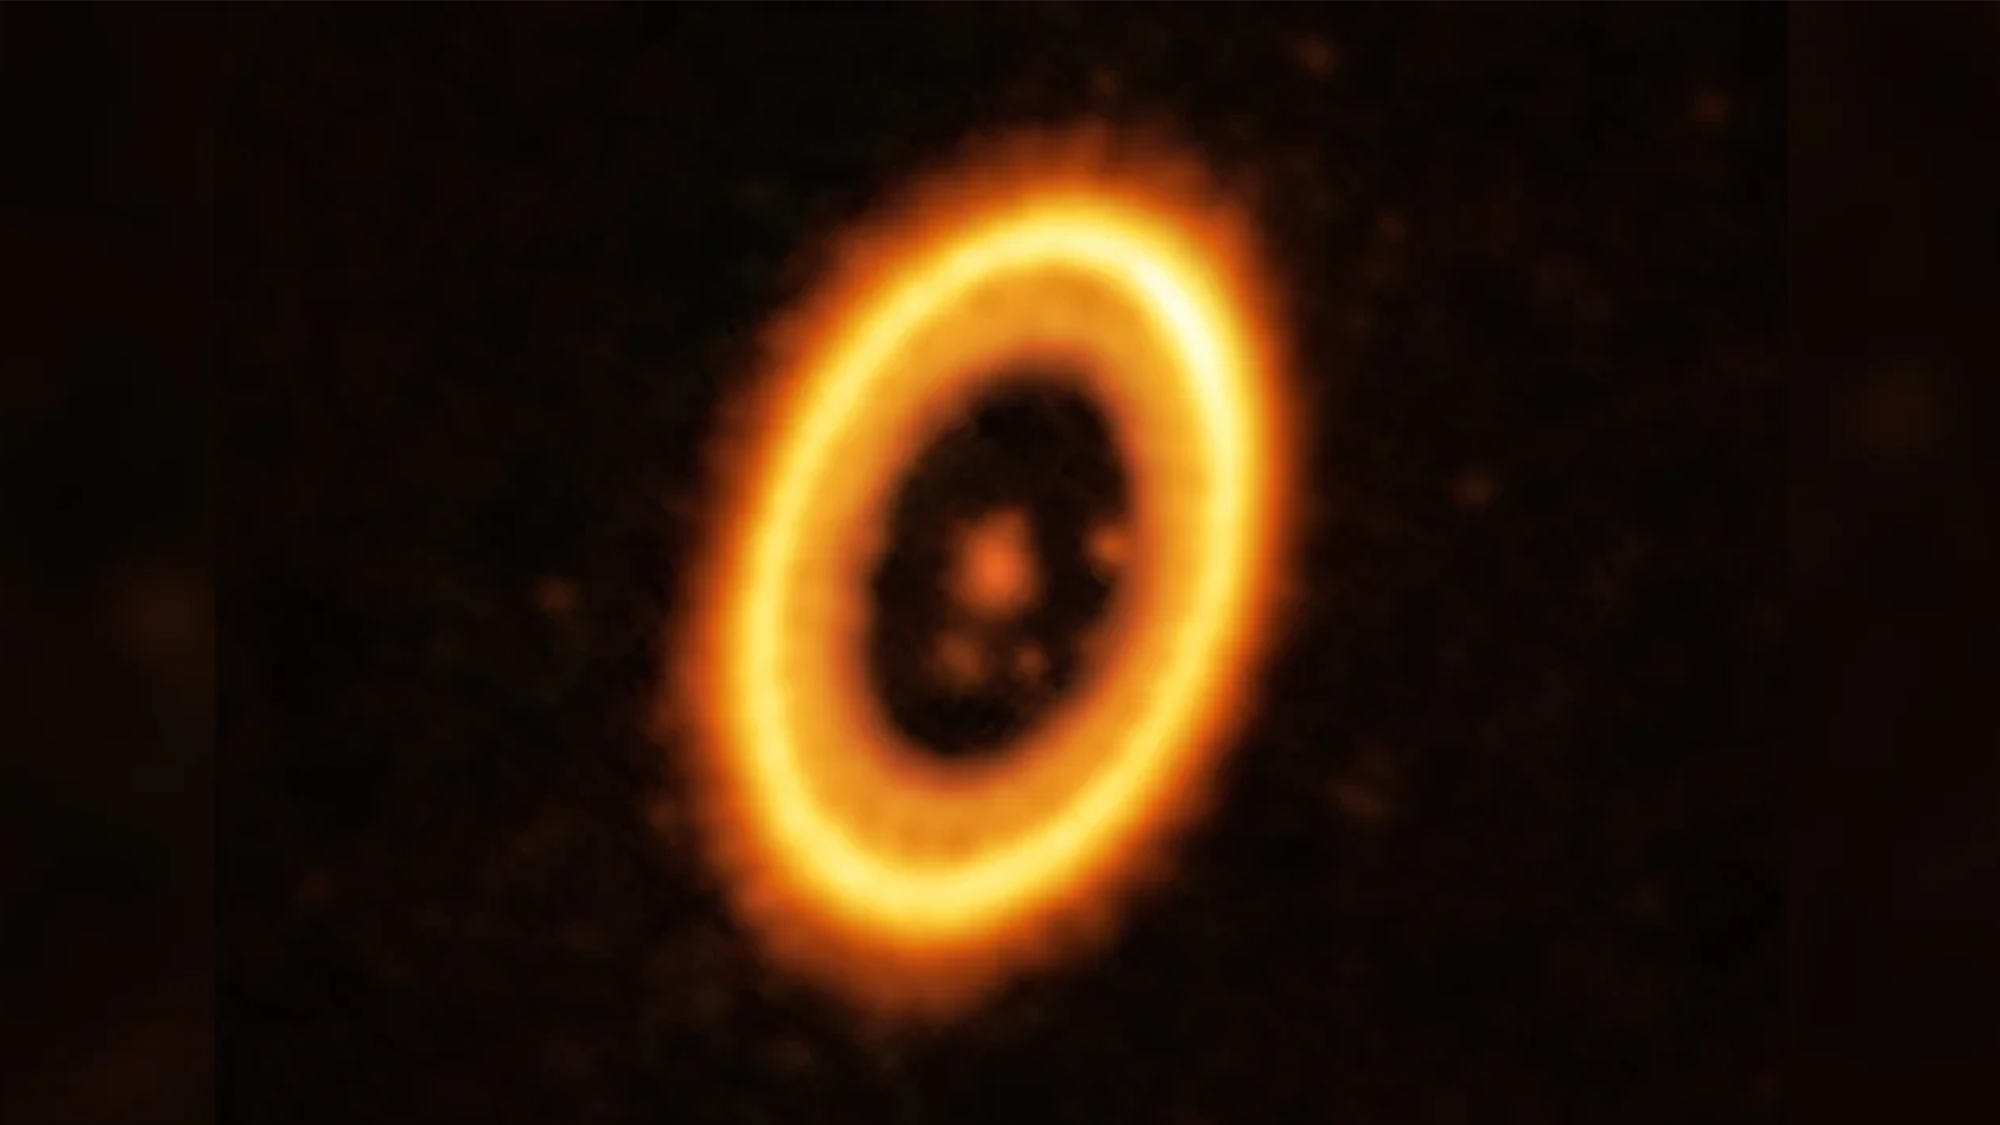 This image taken with the Atacama Large Millimeter/submillimeter Array (ALMA) shows the young planetary system PDS 70, located nearly 400 light-years away from Earth. The system features a star at its center, around which the planet PDS 70 b is orbiting. On the same orbit as PDS 70b, astronomers have detected a cloud of debris that could be the building blocks of a new planet or the remnants of one already formed. The ring-like structure that dominates the image is a circumstellar disc of material, out of which planets are forming. There is in fact another planet in this system: PDS 70c, seen to the right of the inner rim of the disc.